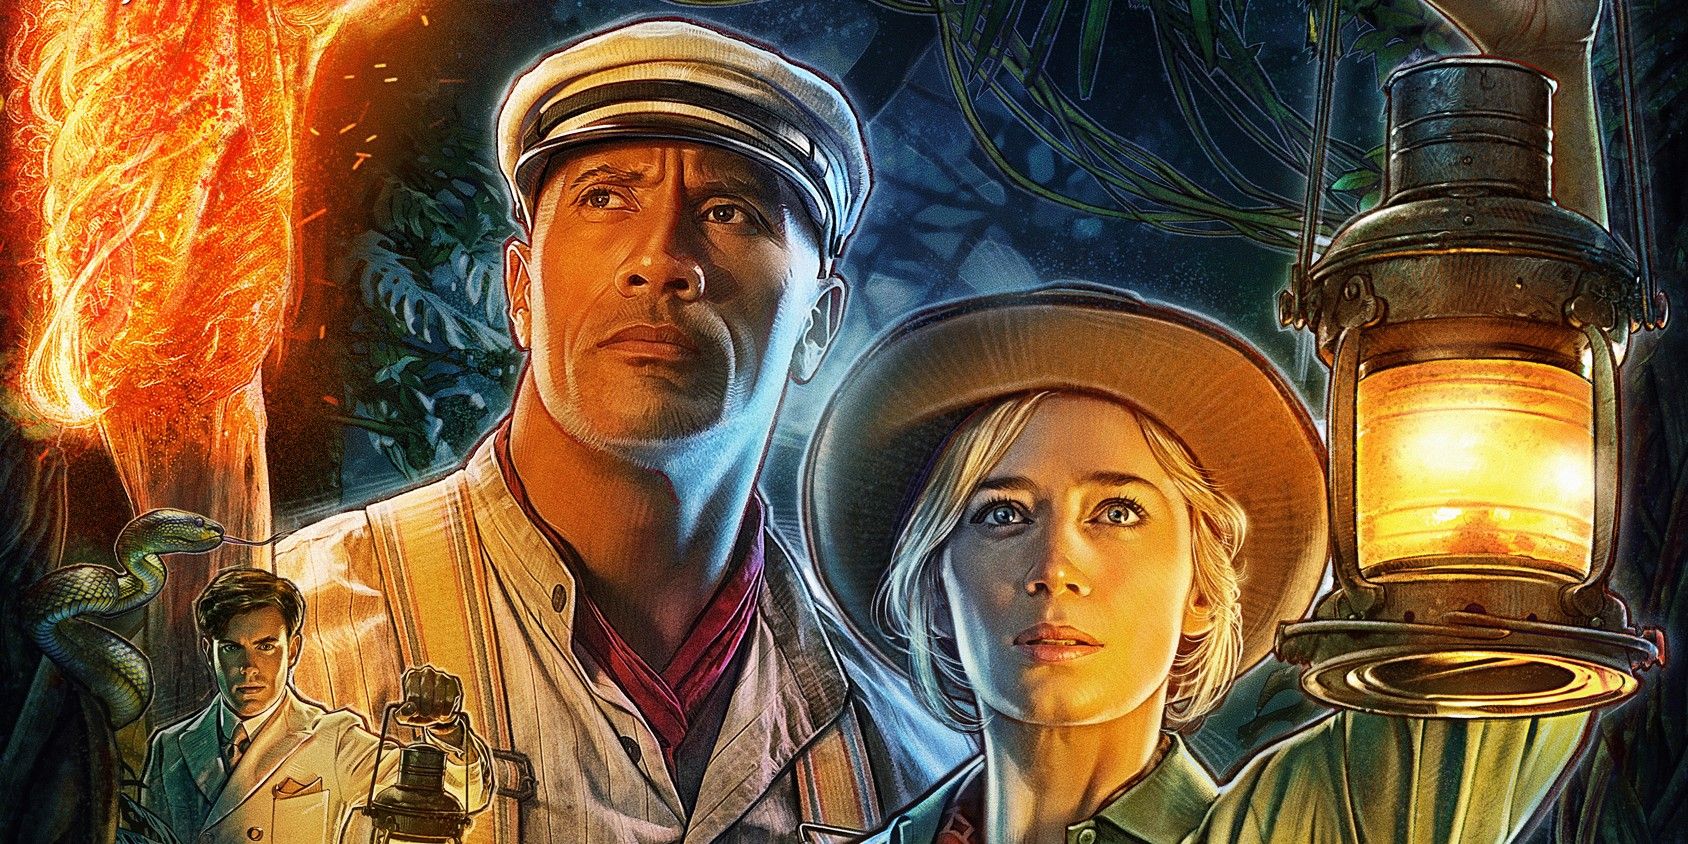 review of film jungle cruise